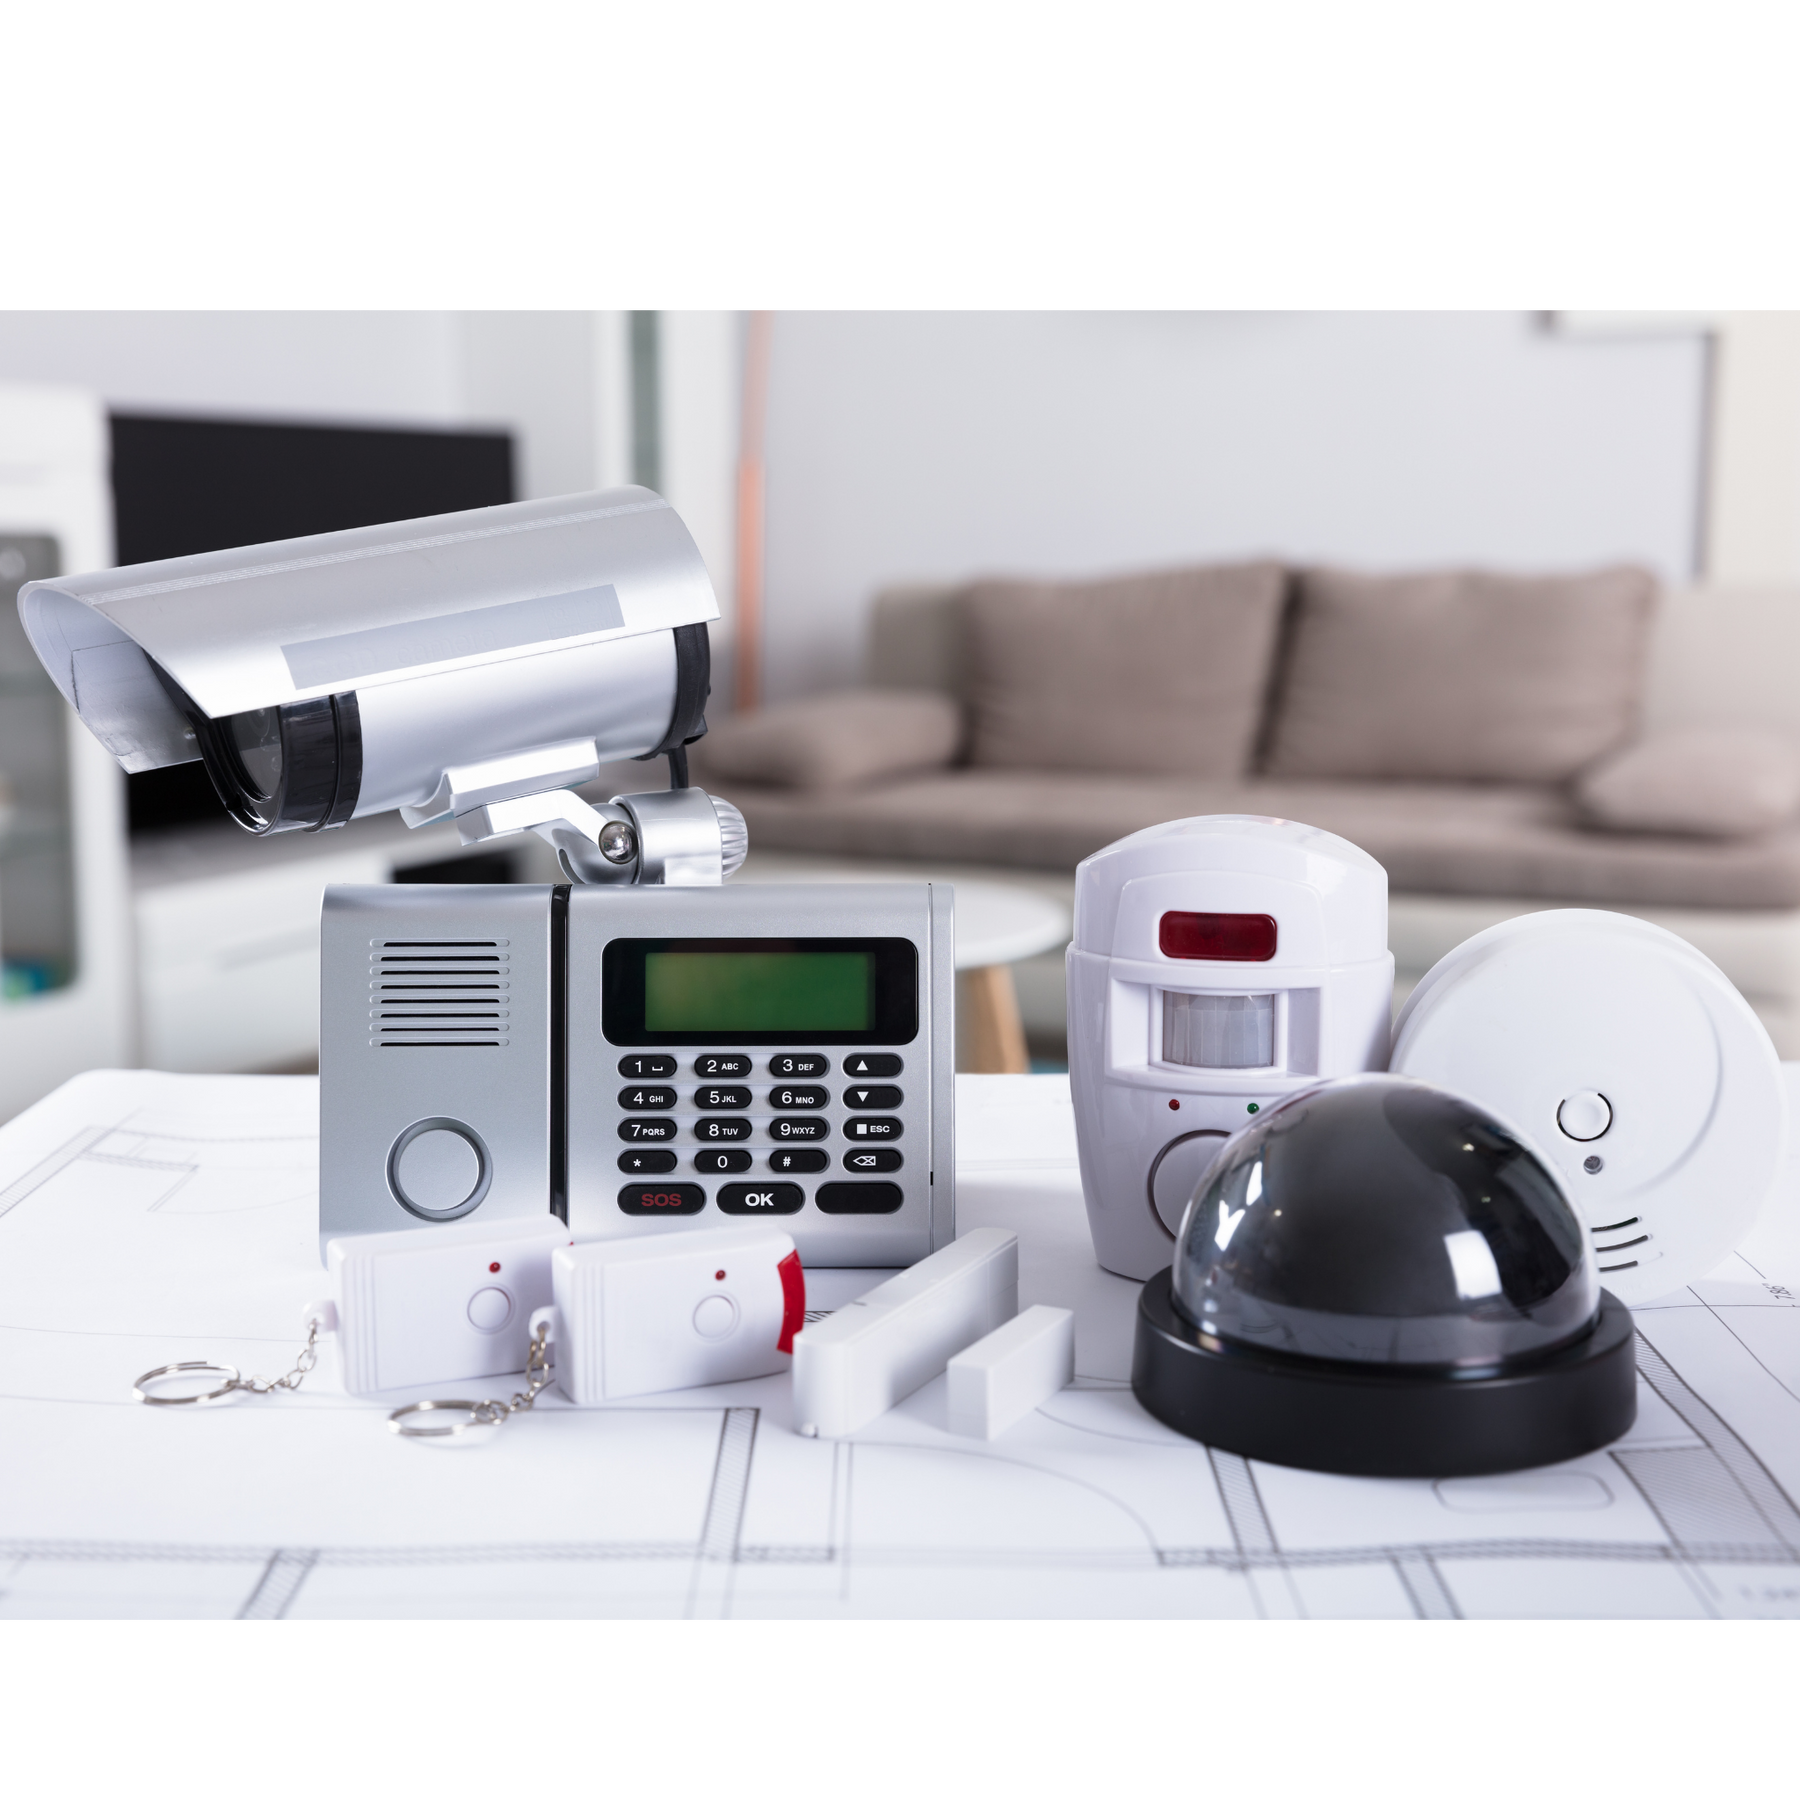 The Importance of Home Security + 5 Top Tips to Secure Your Home